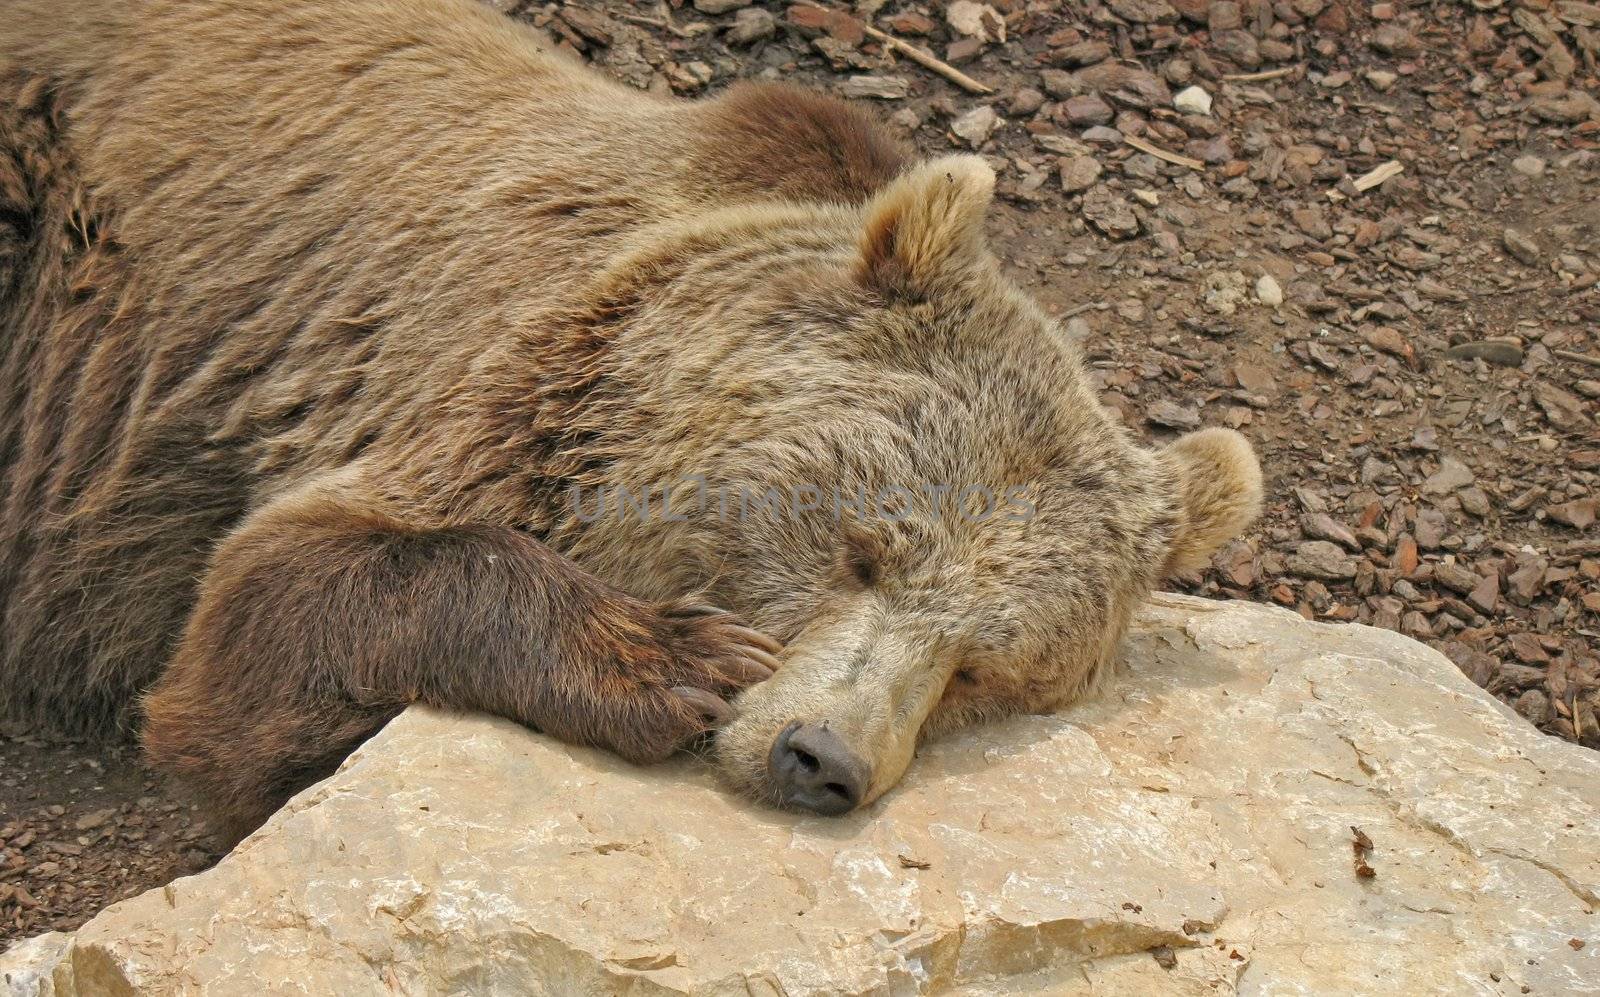 Brown bear that reposes with is head resting on the rocks